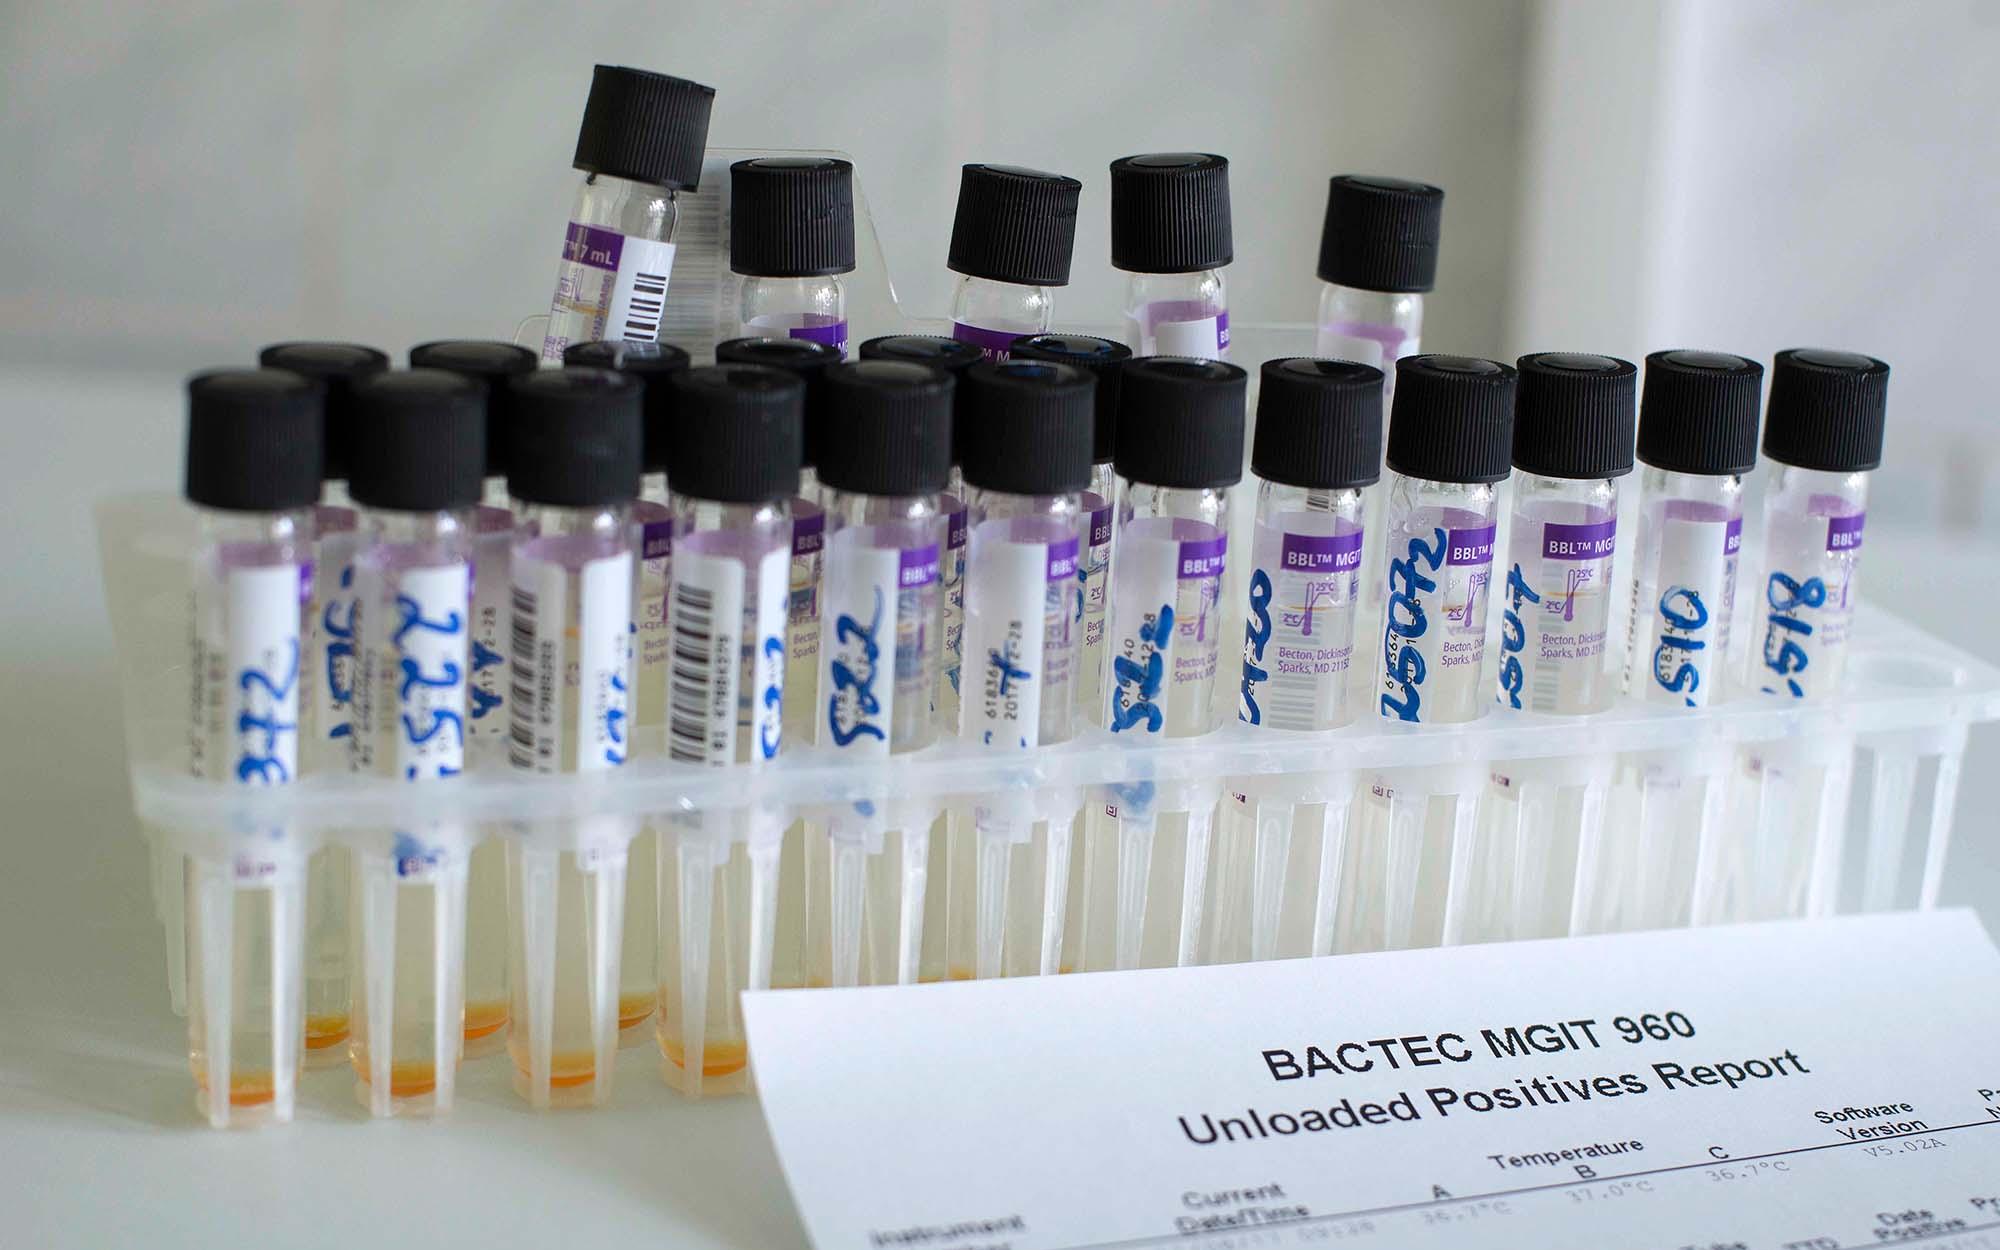 Samples from BACTEC test system used in TB diagnostics and follow-up.